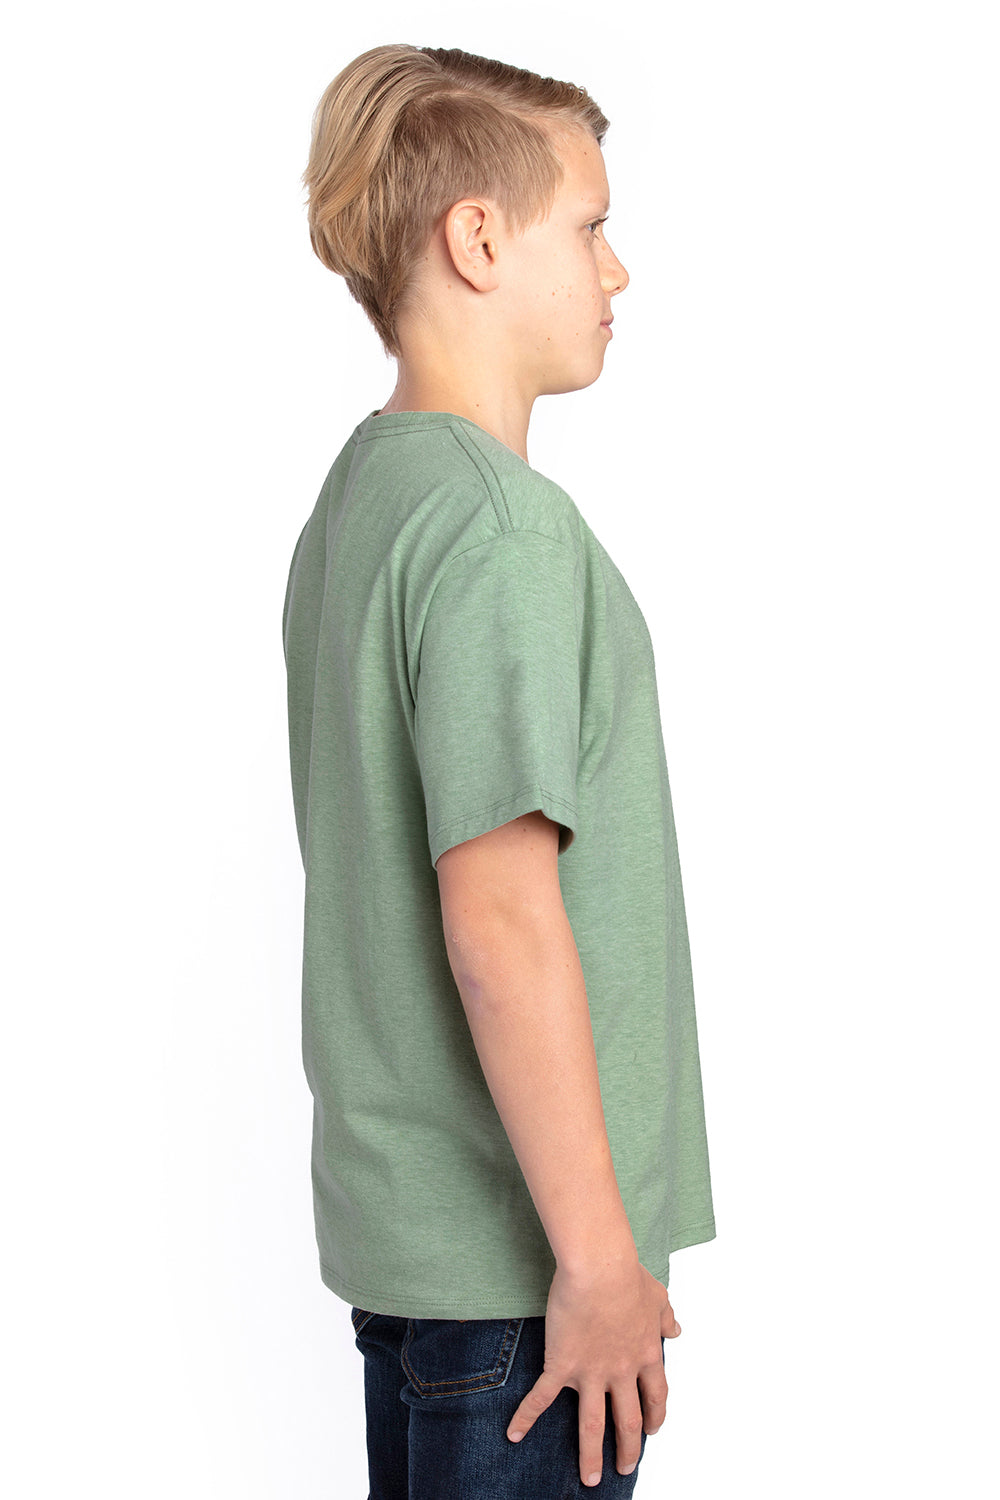 Threadfast Apparel 600A Youth Ultimate Short Sleeve Crewneck T-Shirt Heather Army Green Side